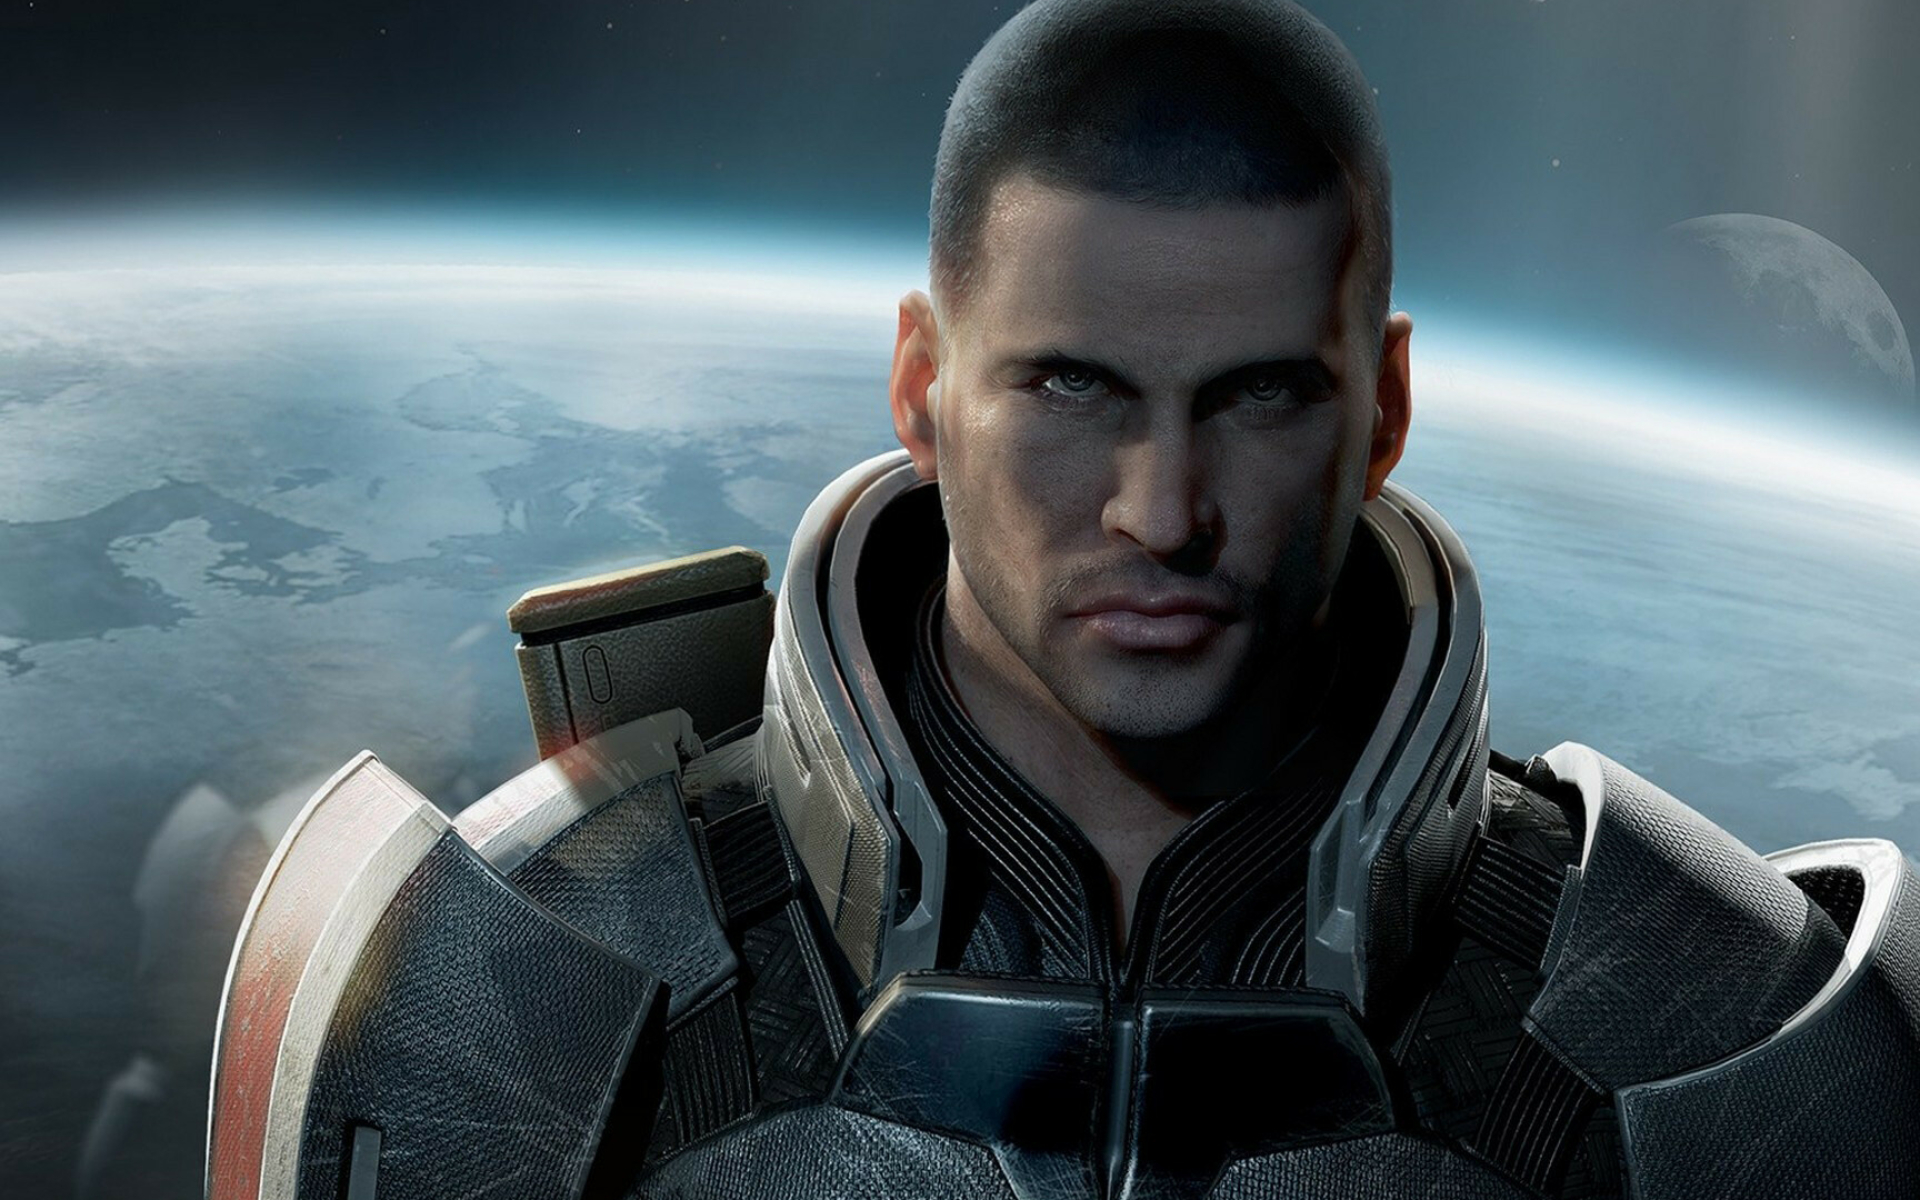 Mass Effect 2: Commander Shepard, The player character in the video game series by BioWare. 1920x1200 HD Wallpaper.